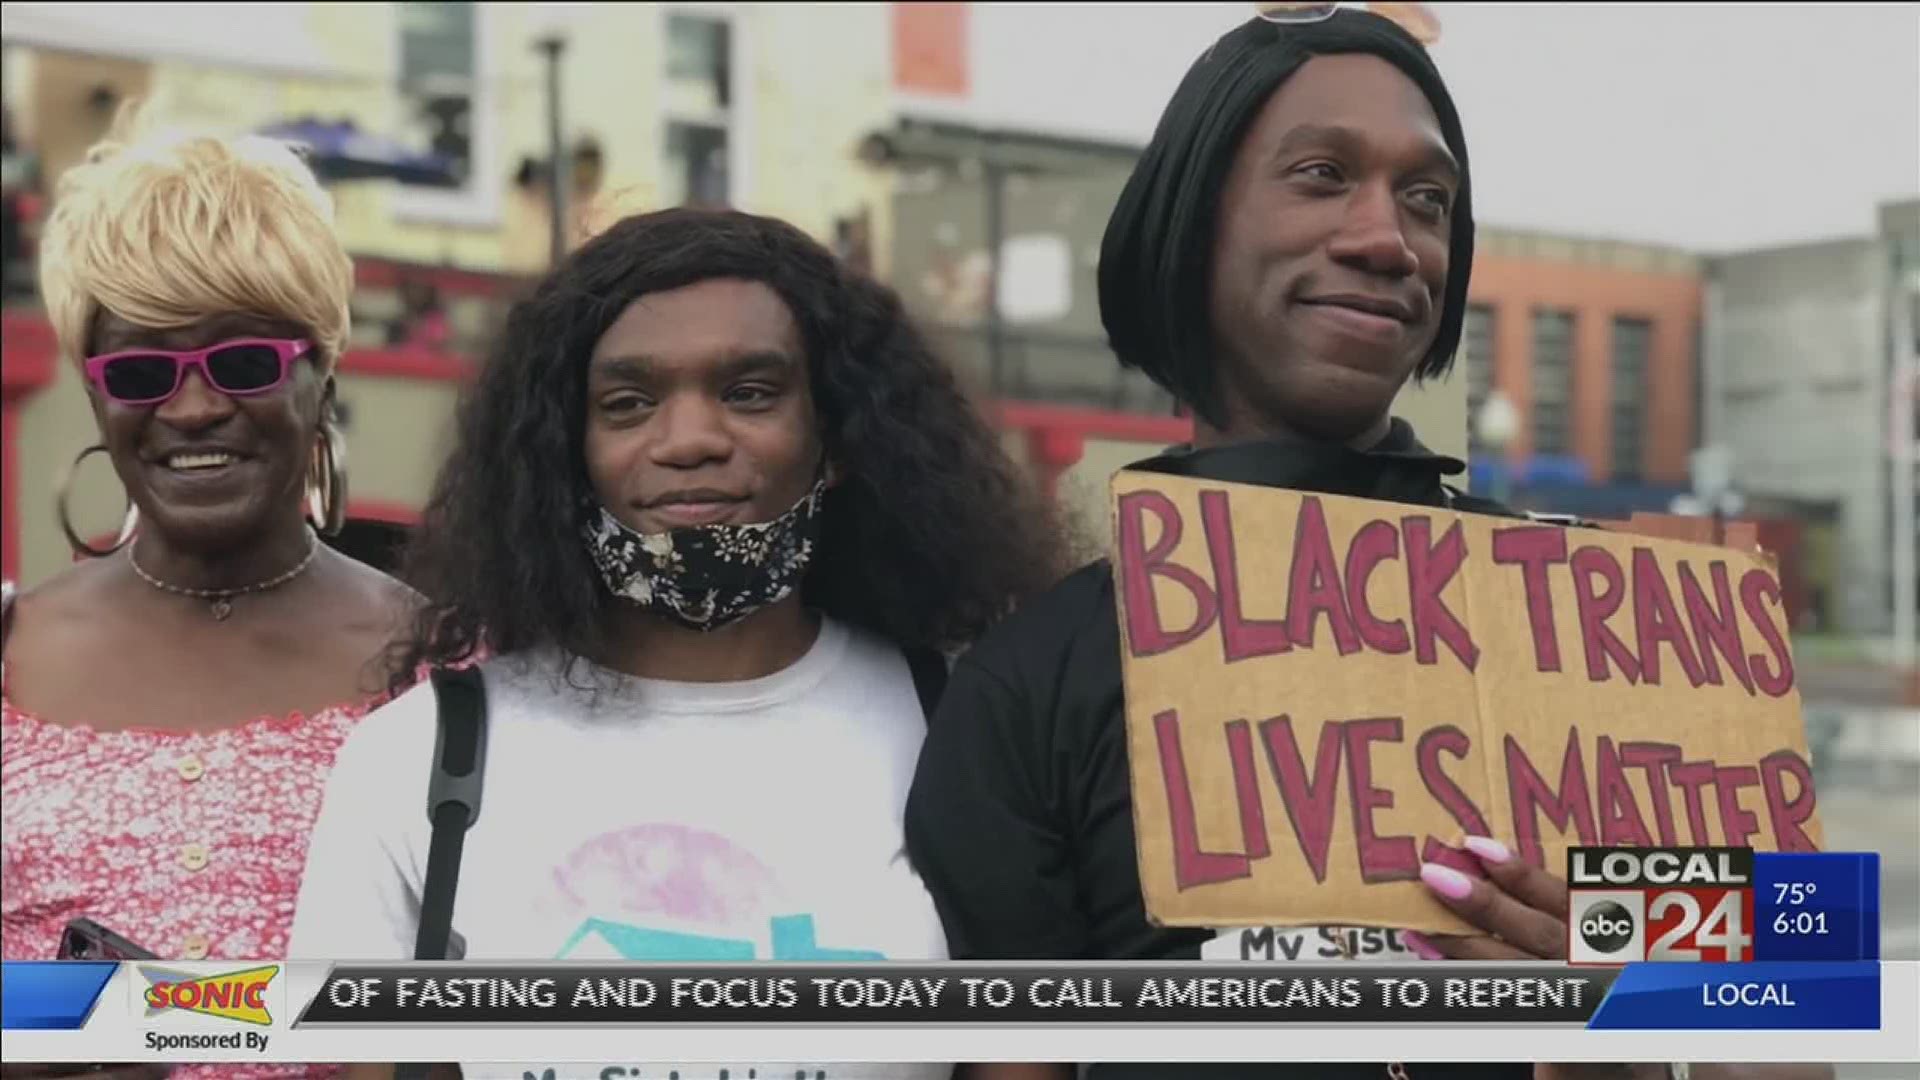 With the growing Black Lives Matter movement following the murder of George Floyd, LGBTQ activists say the movement needs to be inclusive for all black voices.